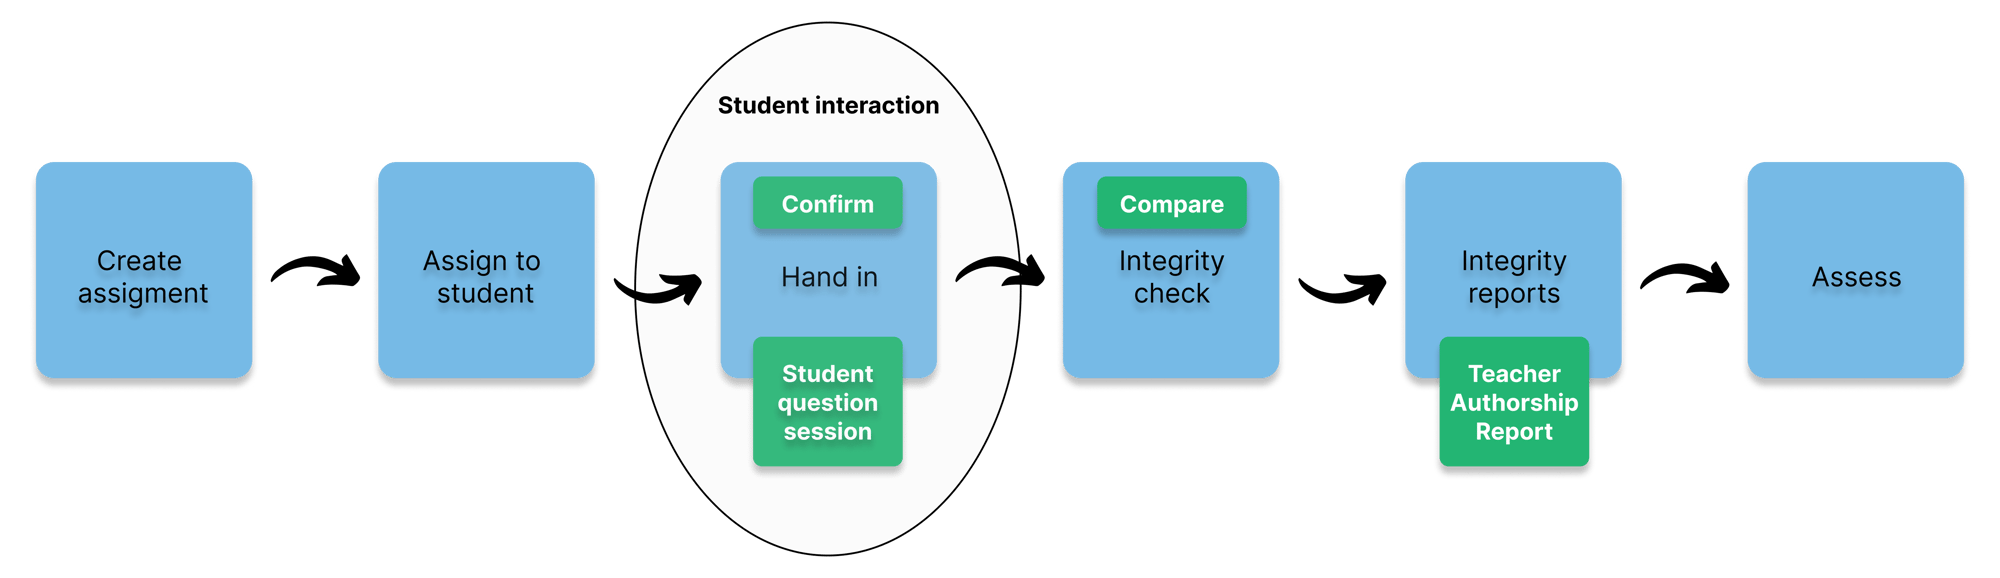 The assignment management process: create assignment, then assign to studens, then students handing in followed by the automatic question session, then the automatic integrity check,  with results presented in an actionable insights report, before the assessment response can be assessed.